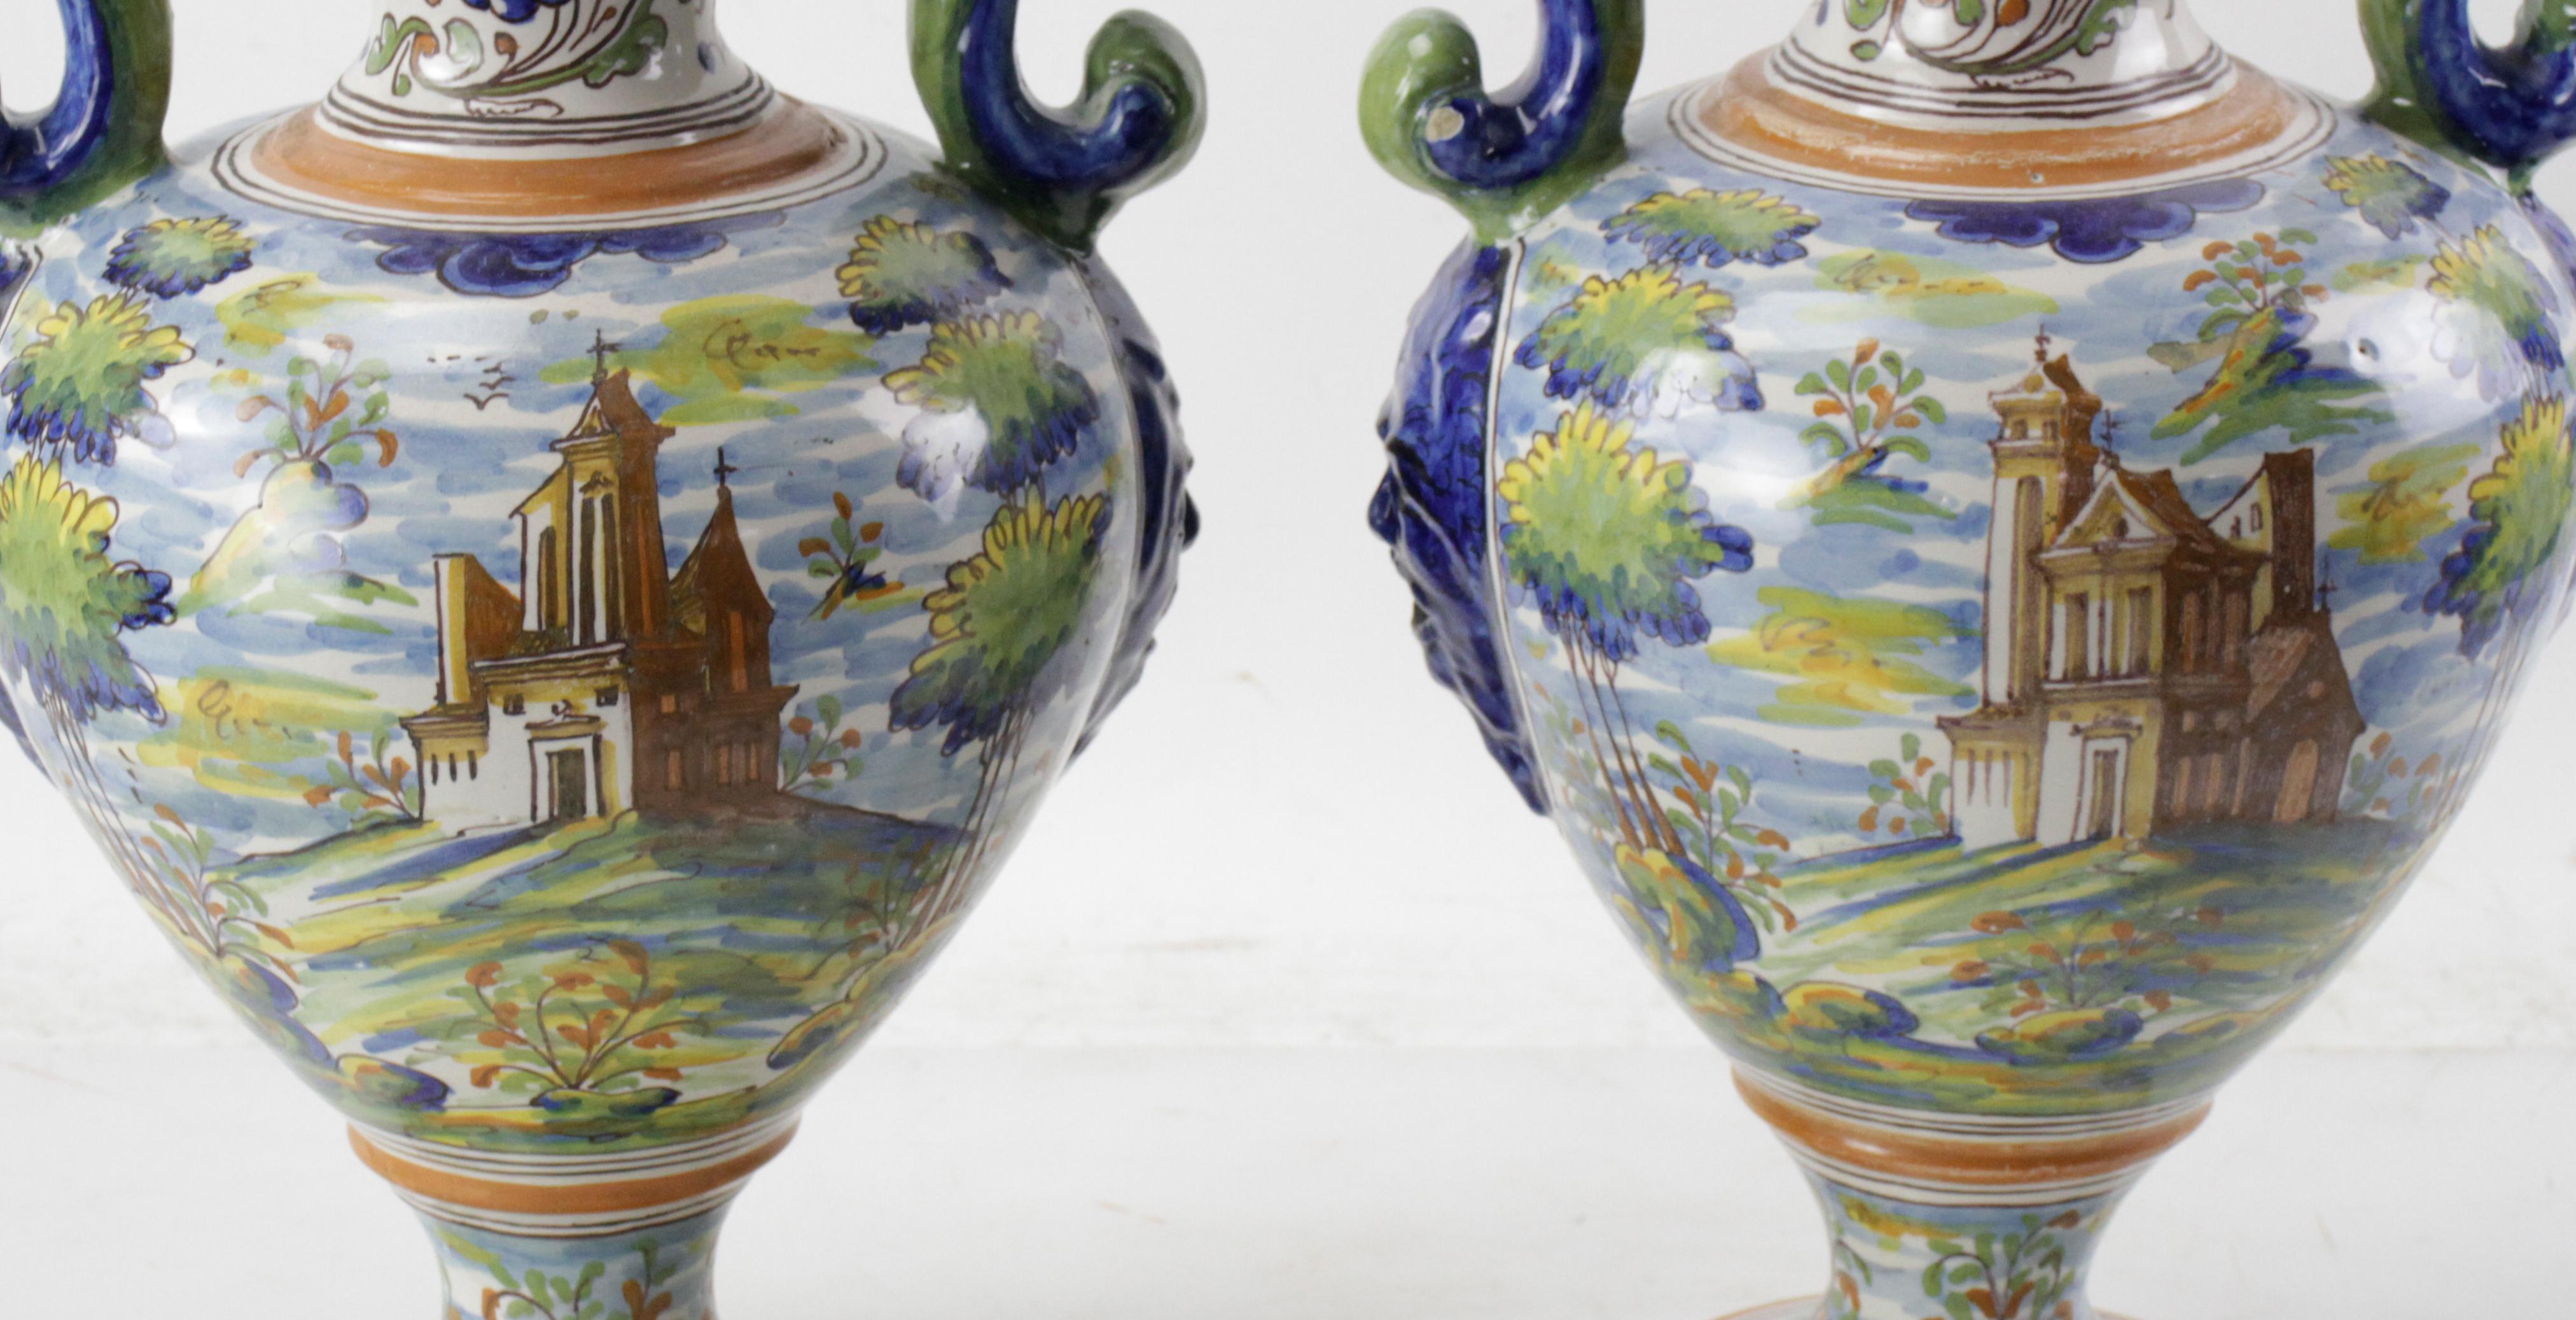 Pair of Antique Italian Majolica Italian Blue and Green Two Handled Urns  In Good Condition For Sale In Essex, MA